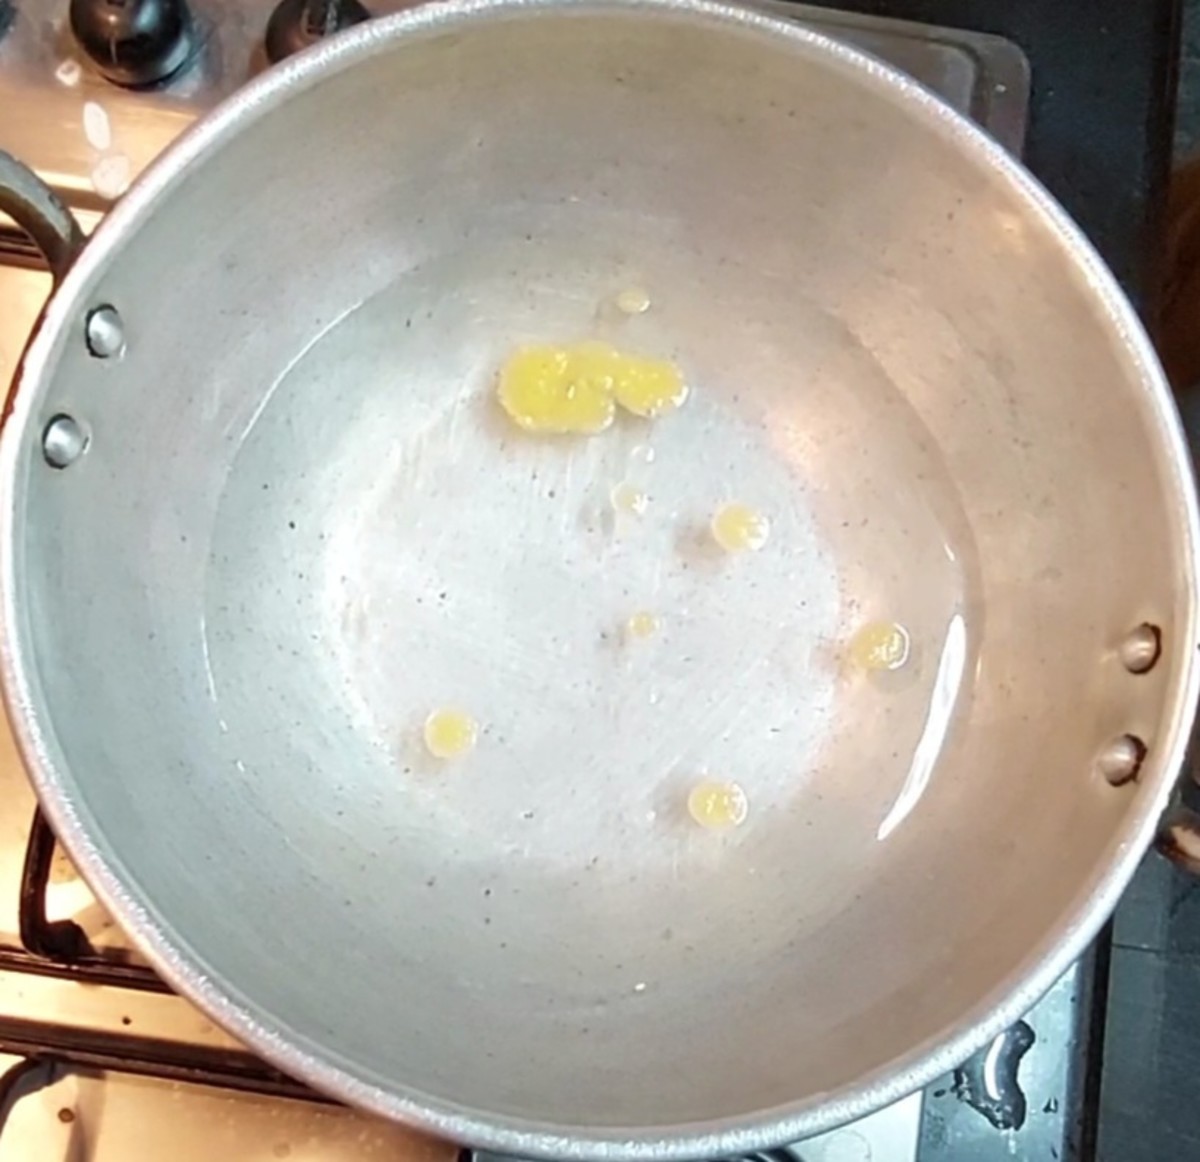 In a vessel or pan, add 2 cups of water, salt and 1 teaspoon ghee. Close the lid and let it come to a boil.